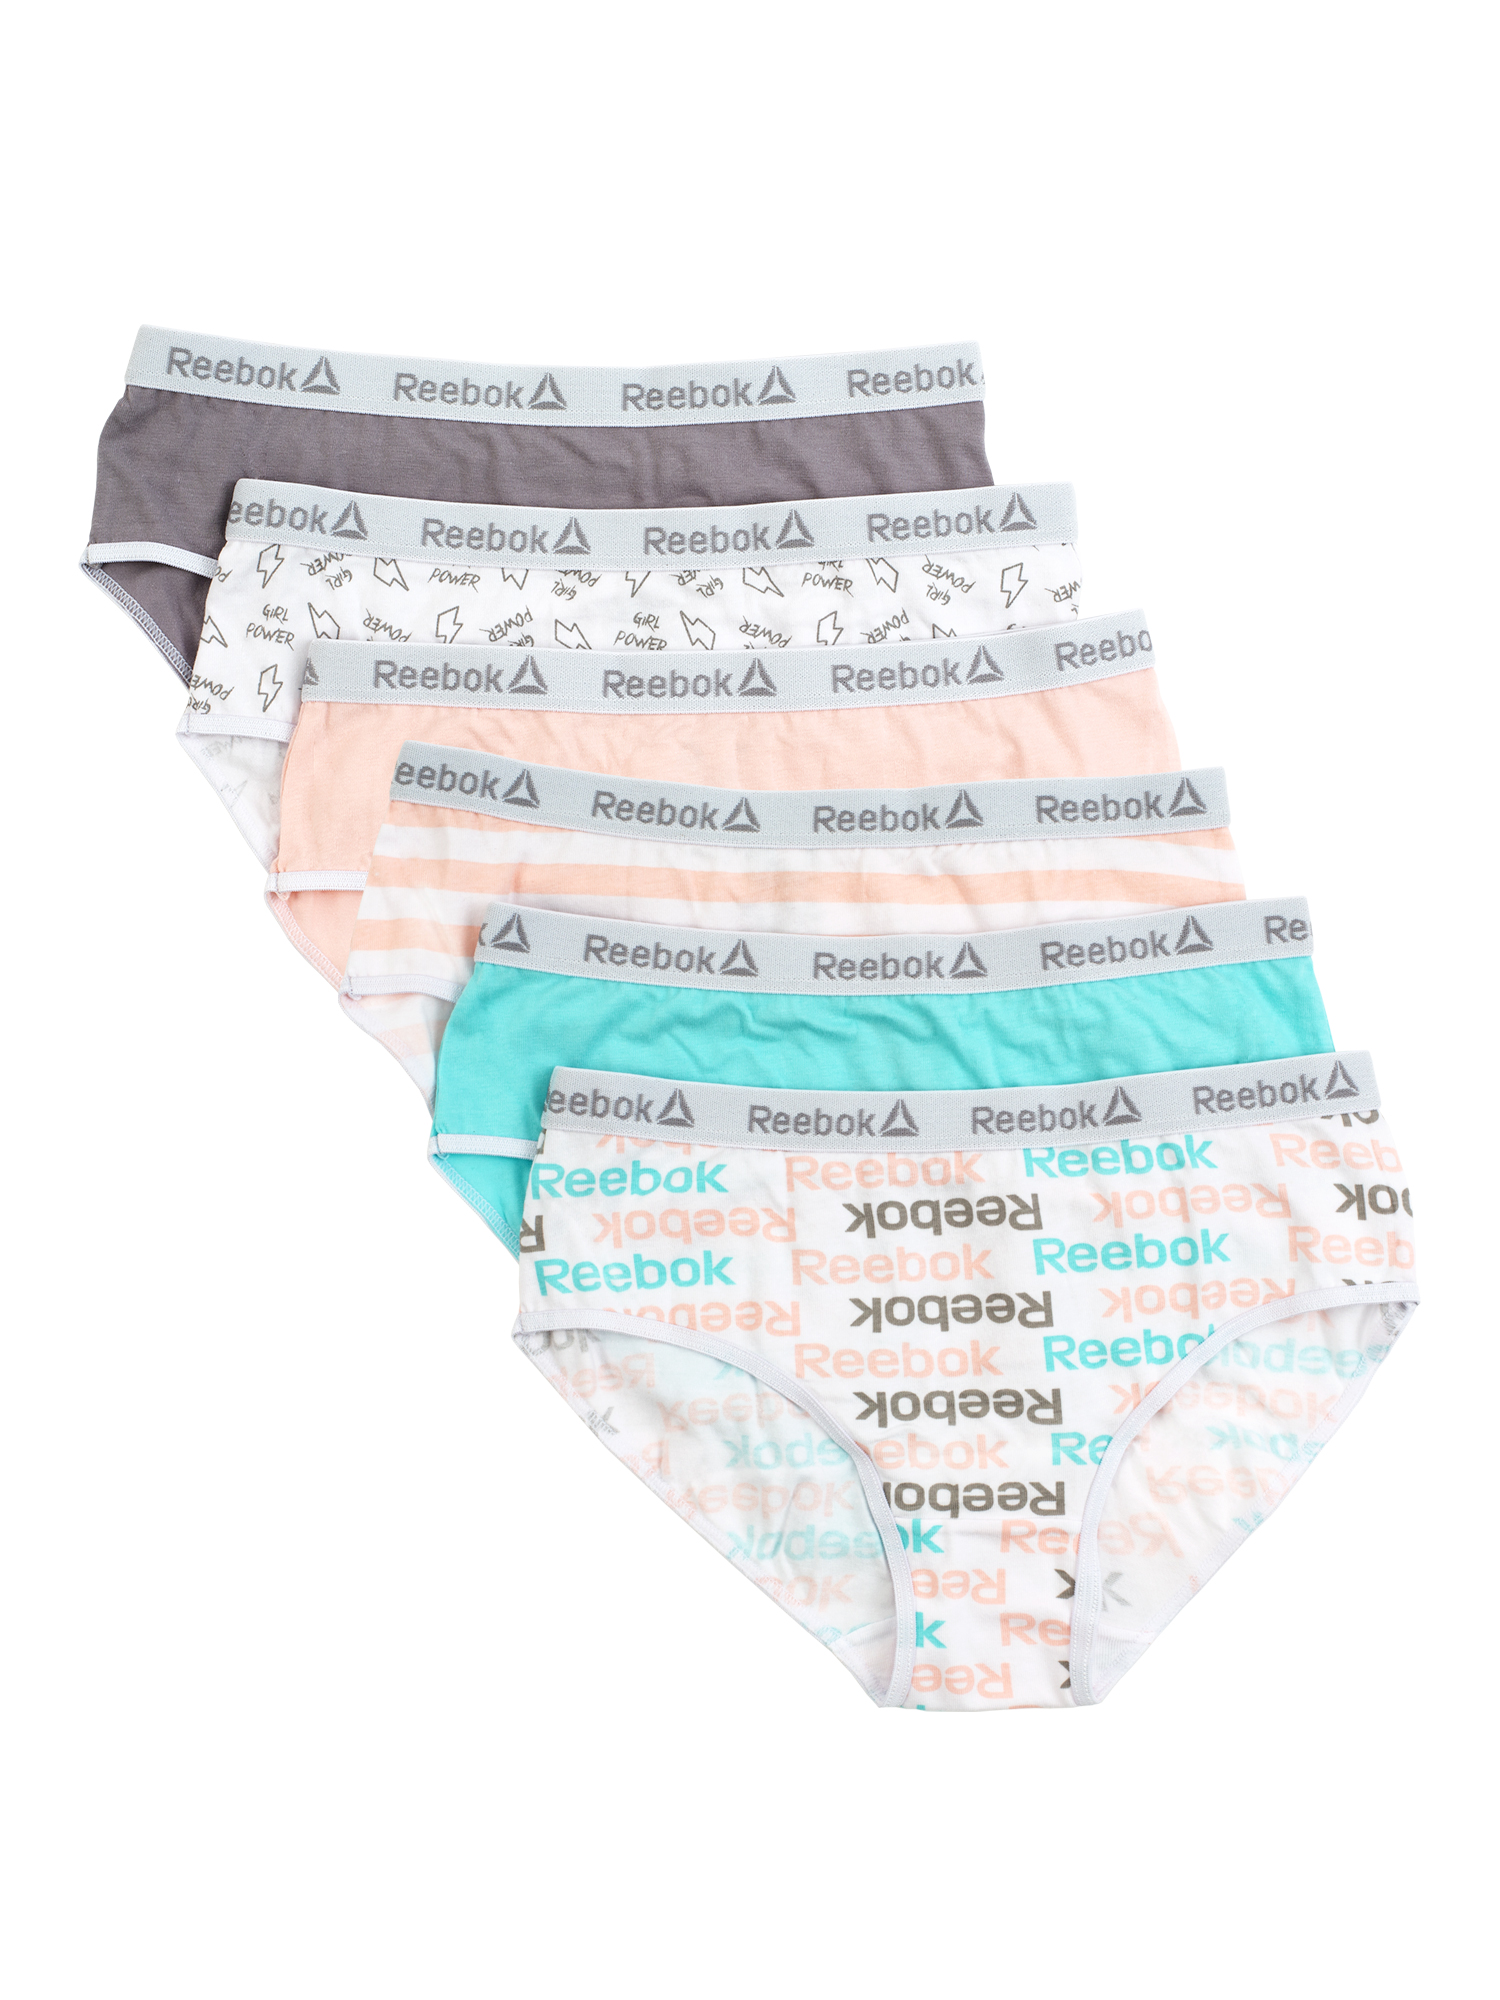 Reebok Girls Underwear Cotton Stretch Hipster Panties, 6-Pack, Sizes S-XL - image 1 of 4